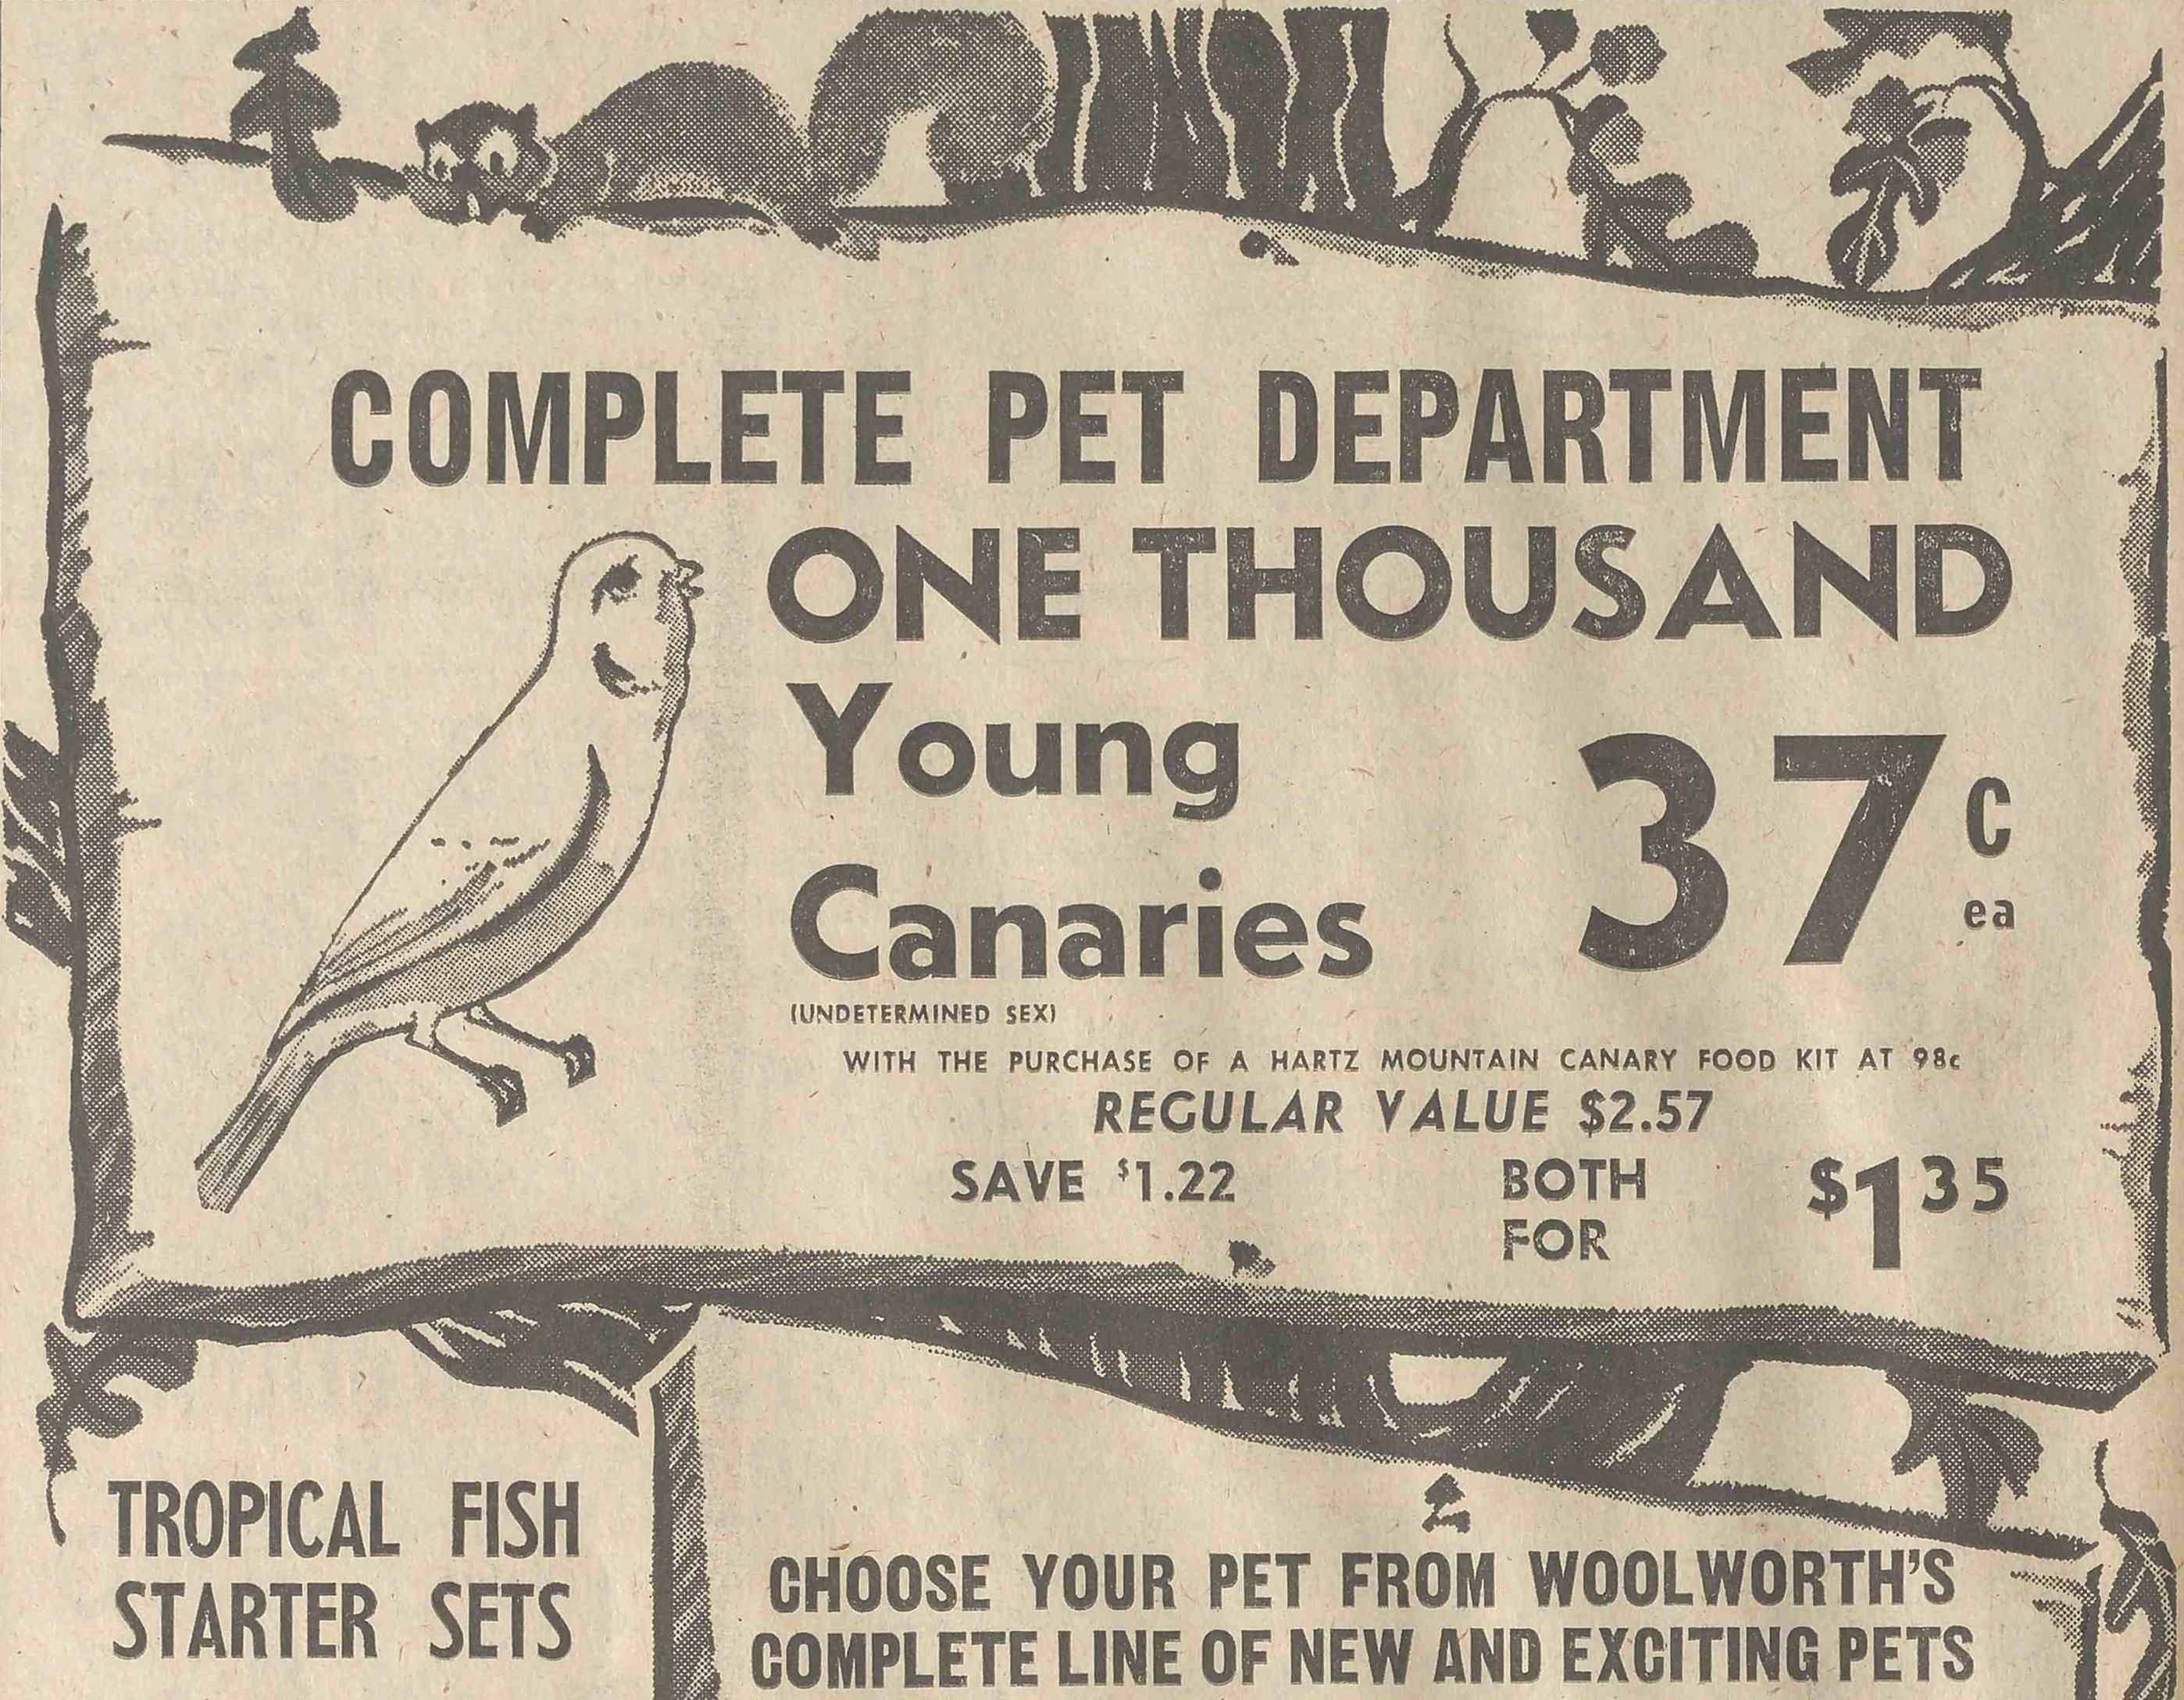 Newspaper clipping advertising "One Thousand Young Canaries" with illustrations of a bird and squirrel.